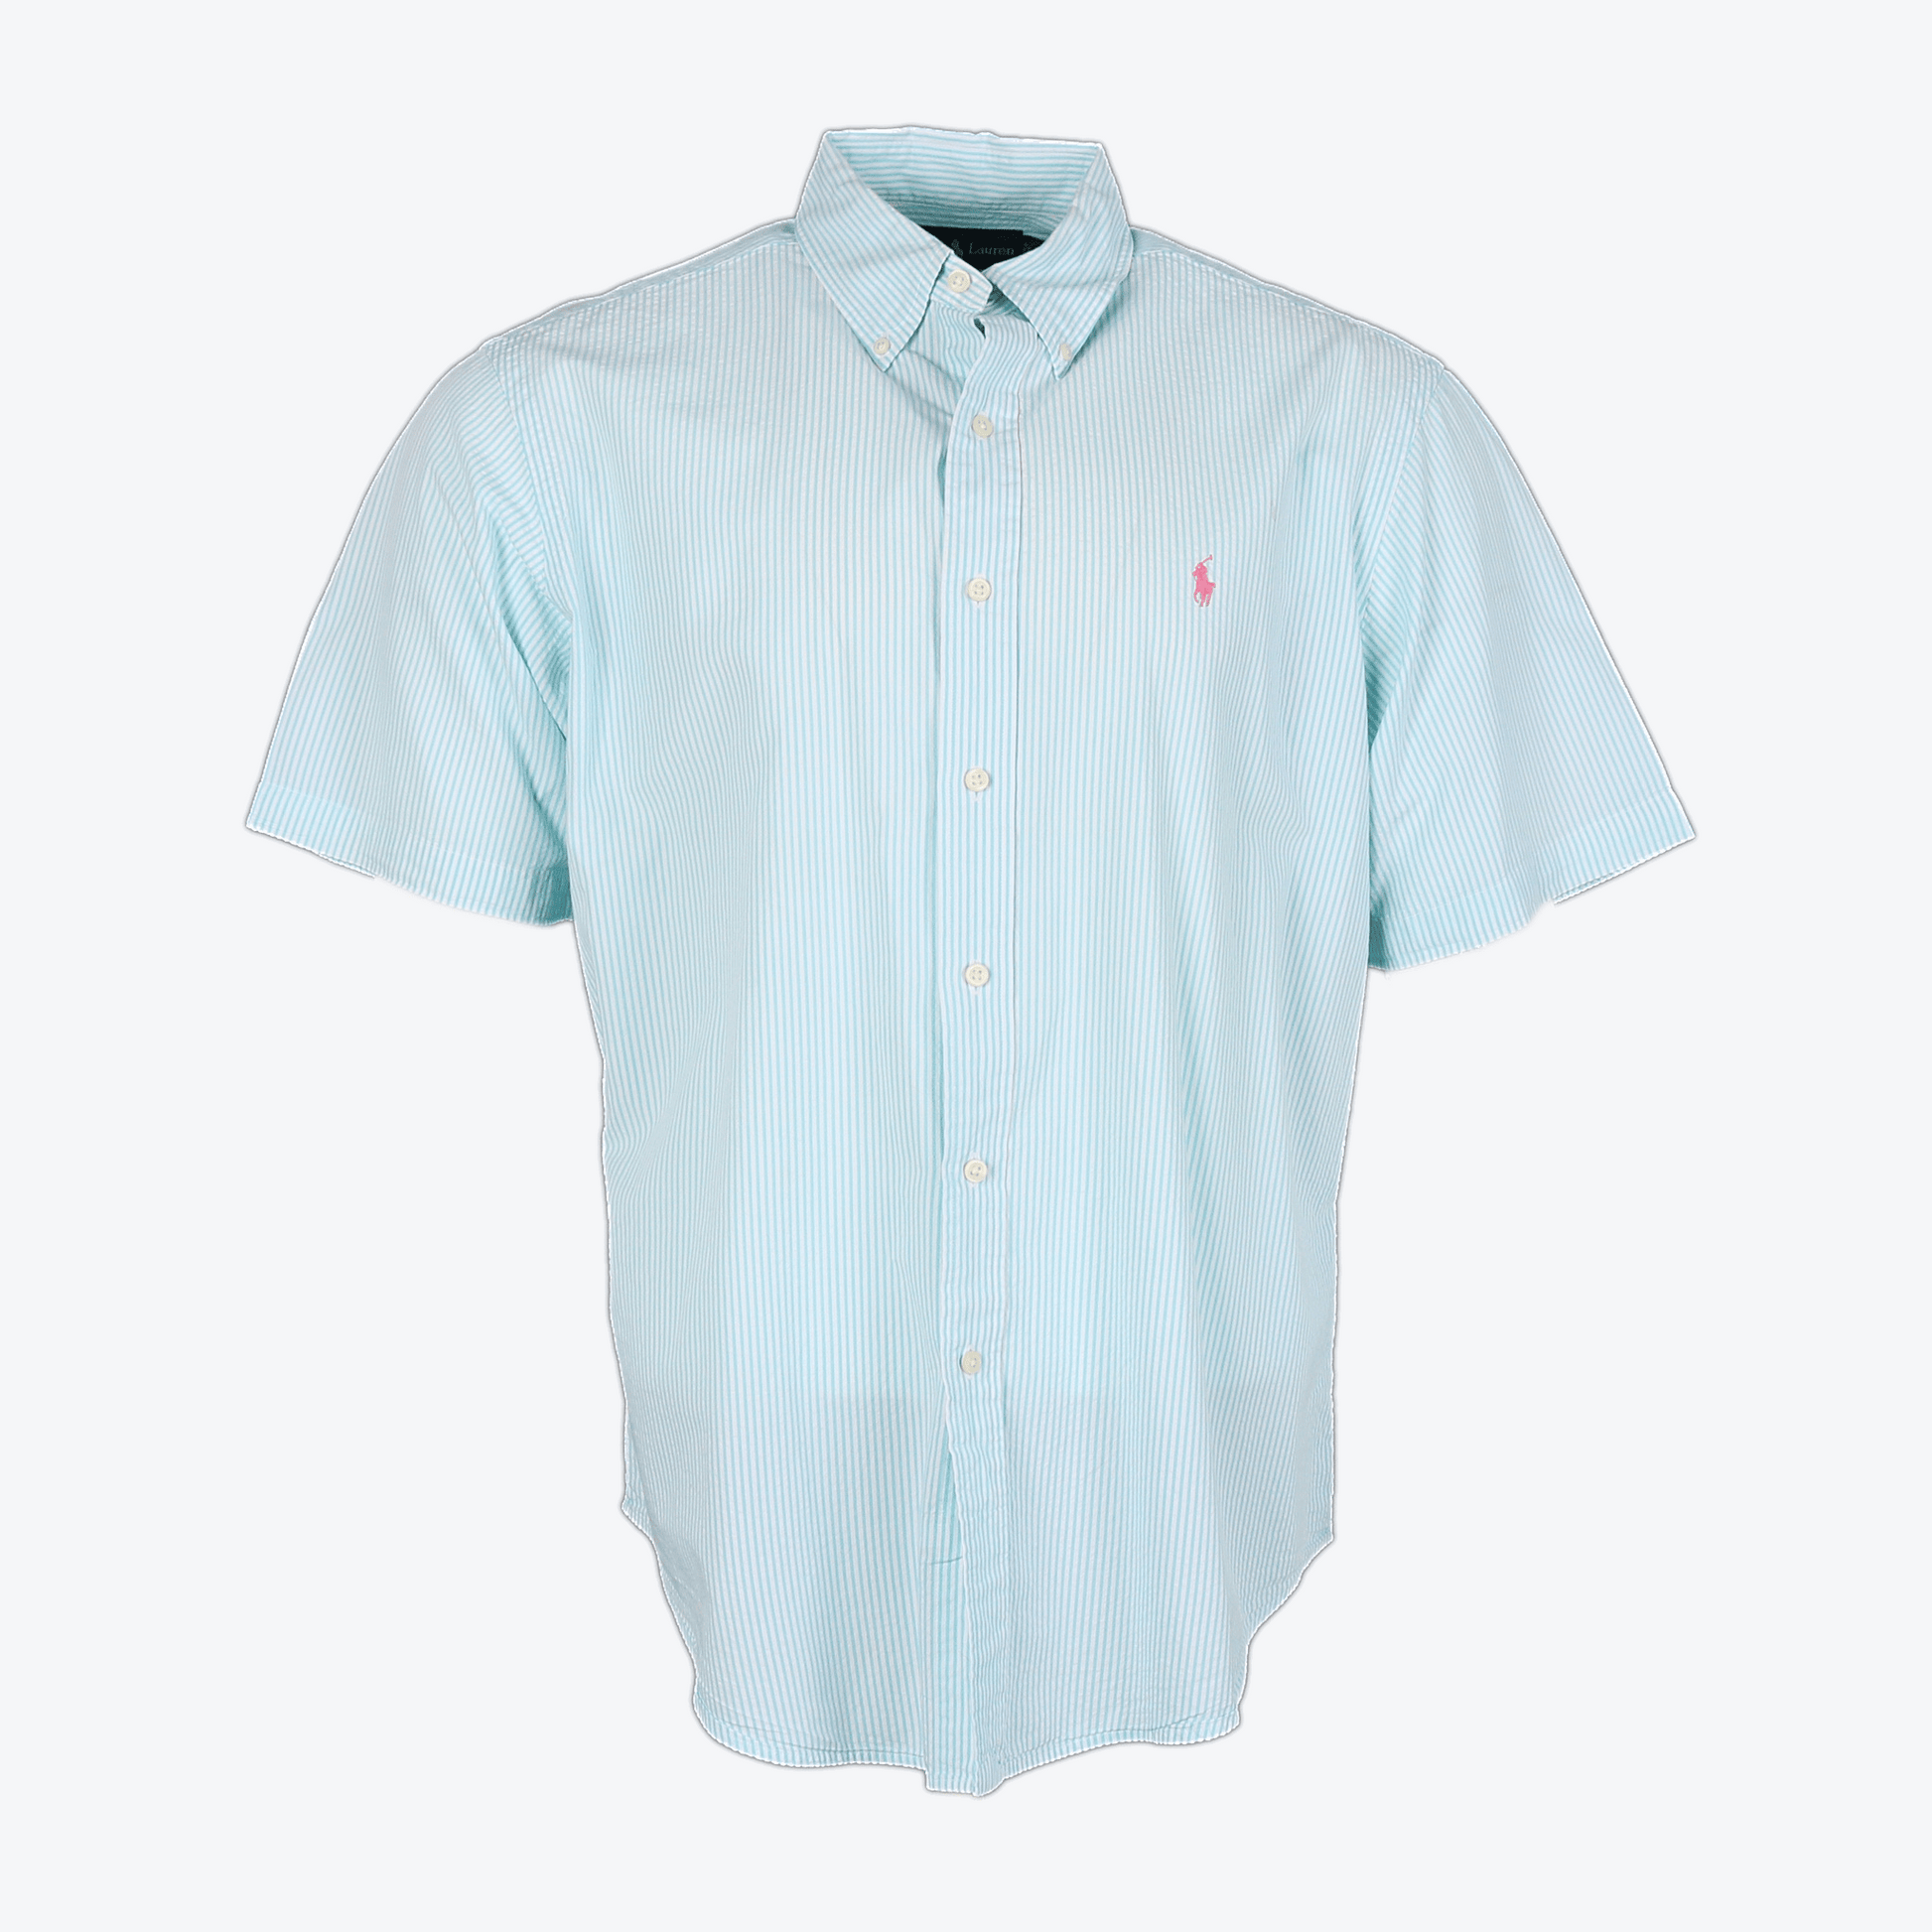 Vintage Shirt - Striped - American Madness